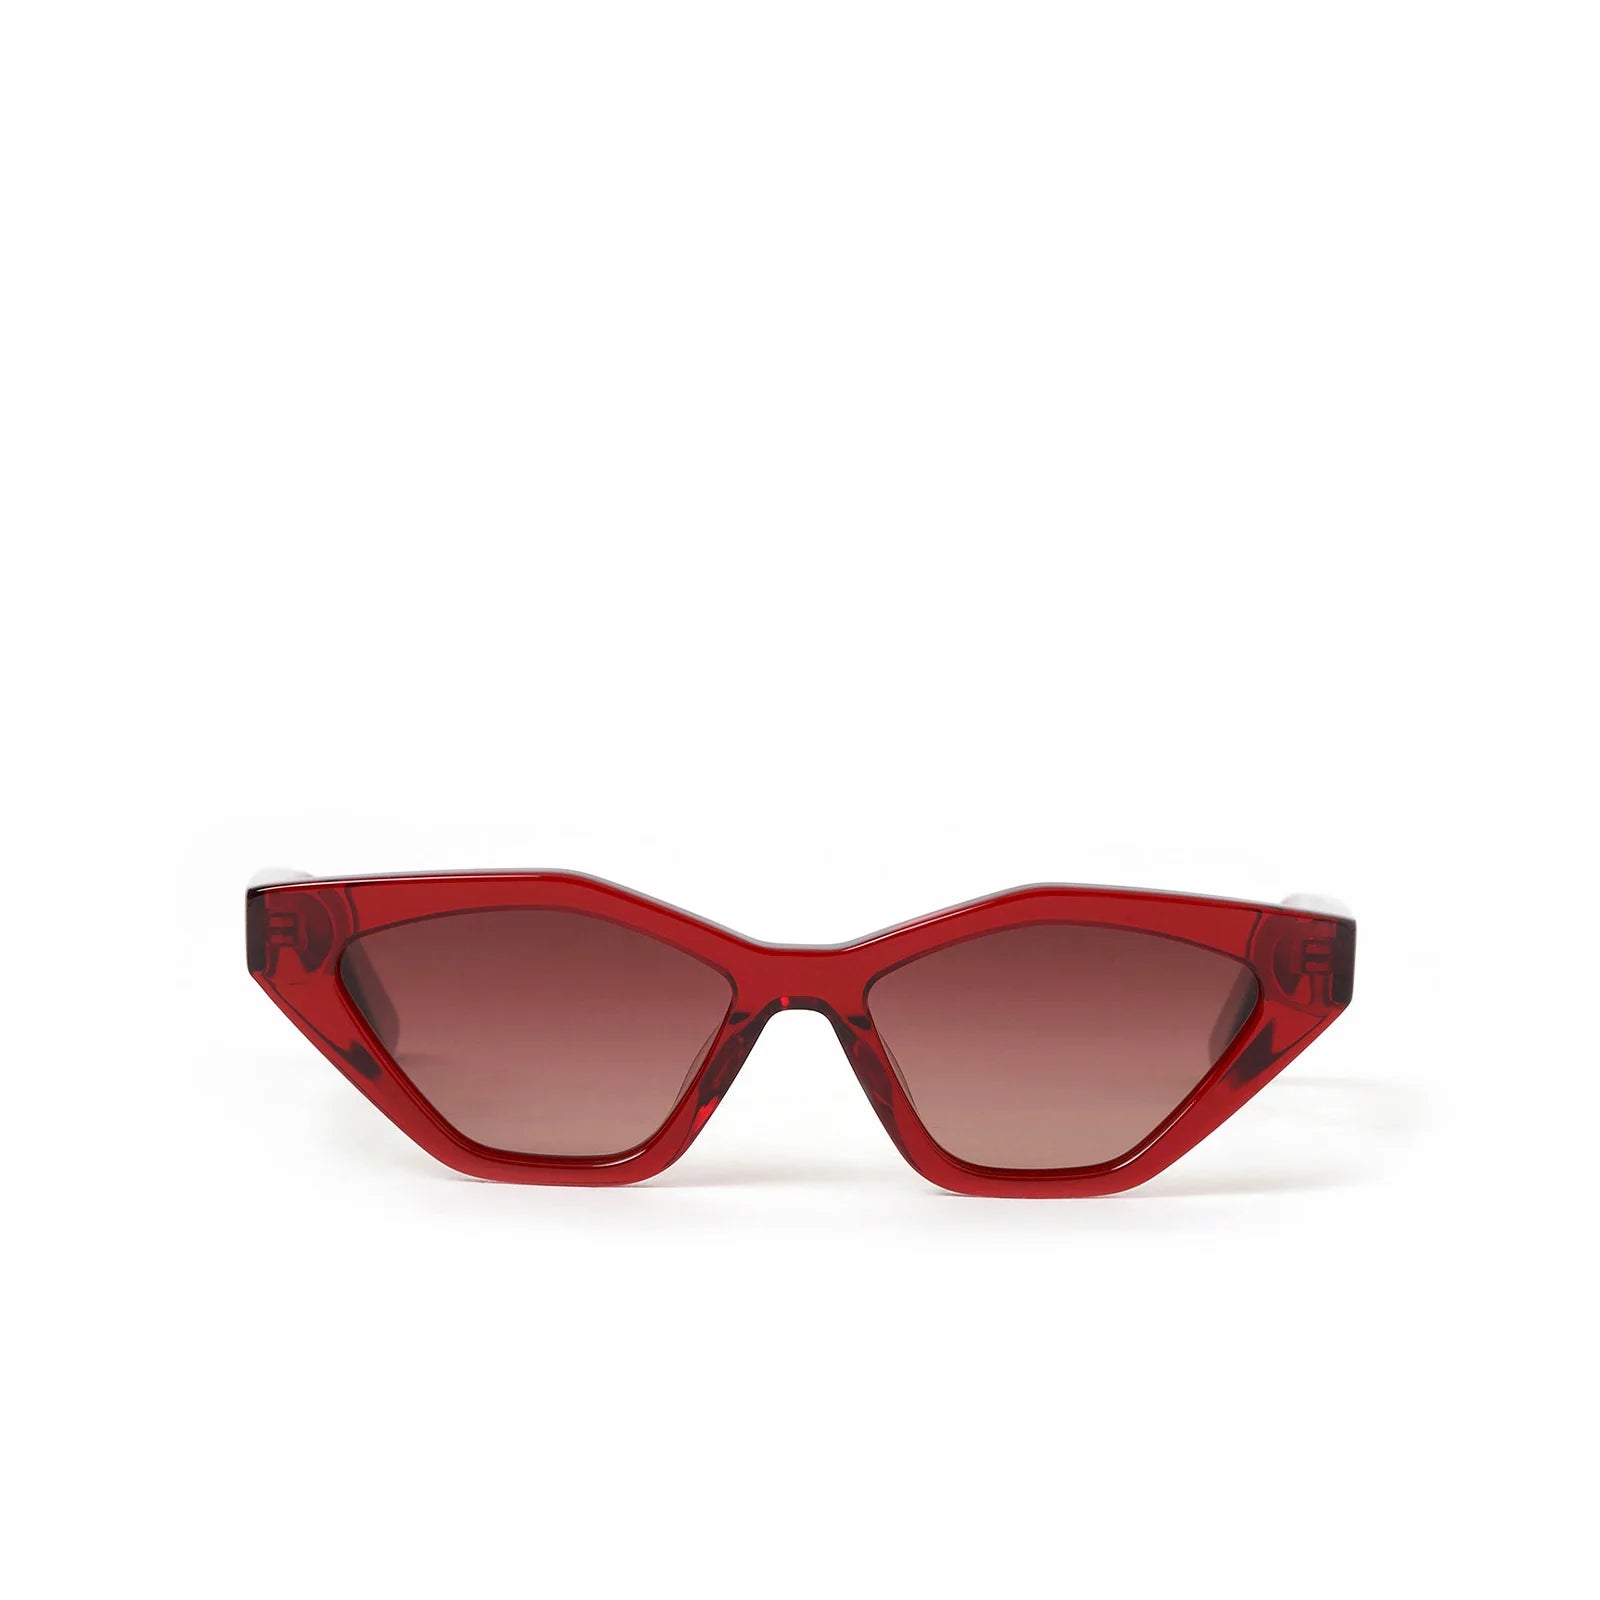 ARMS OF EVE JAGGER SUNGLASSES: CHERRY RED